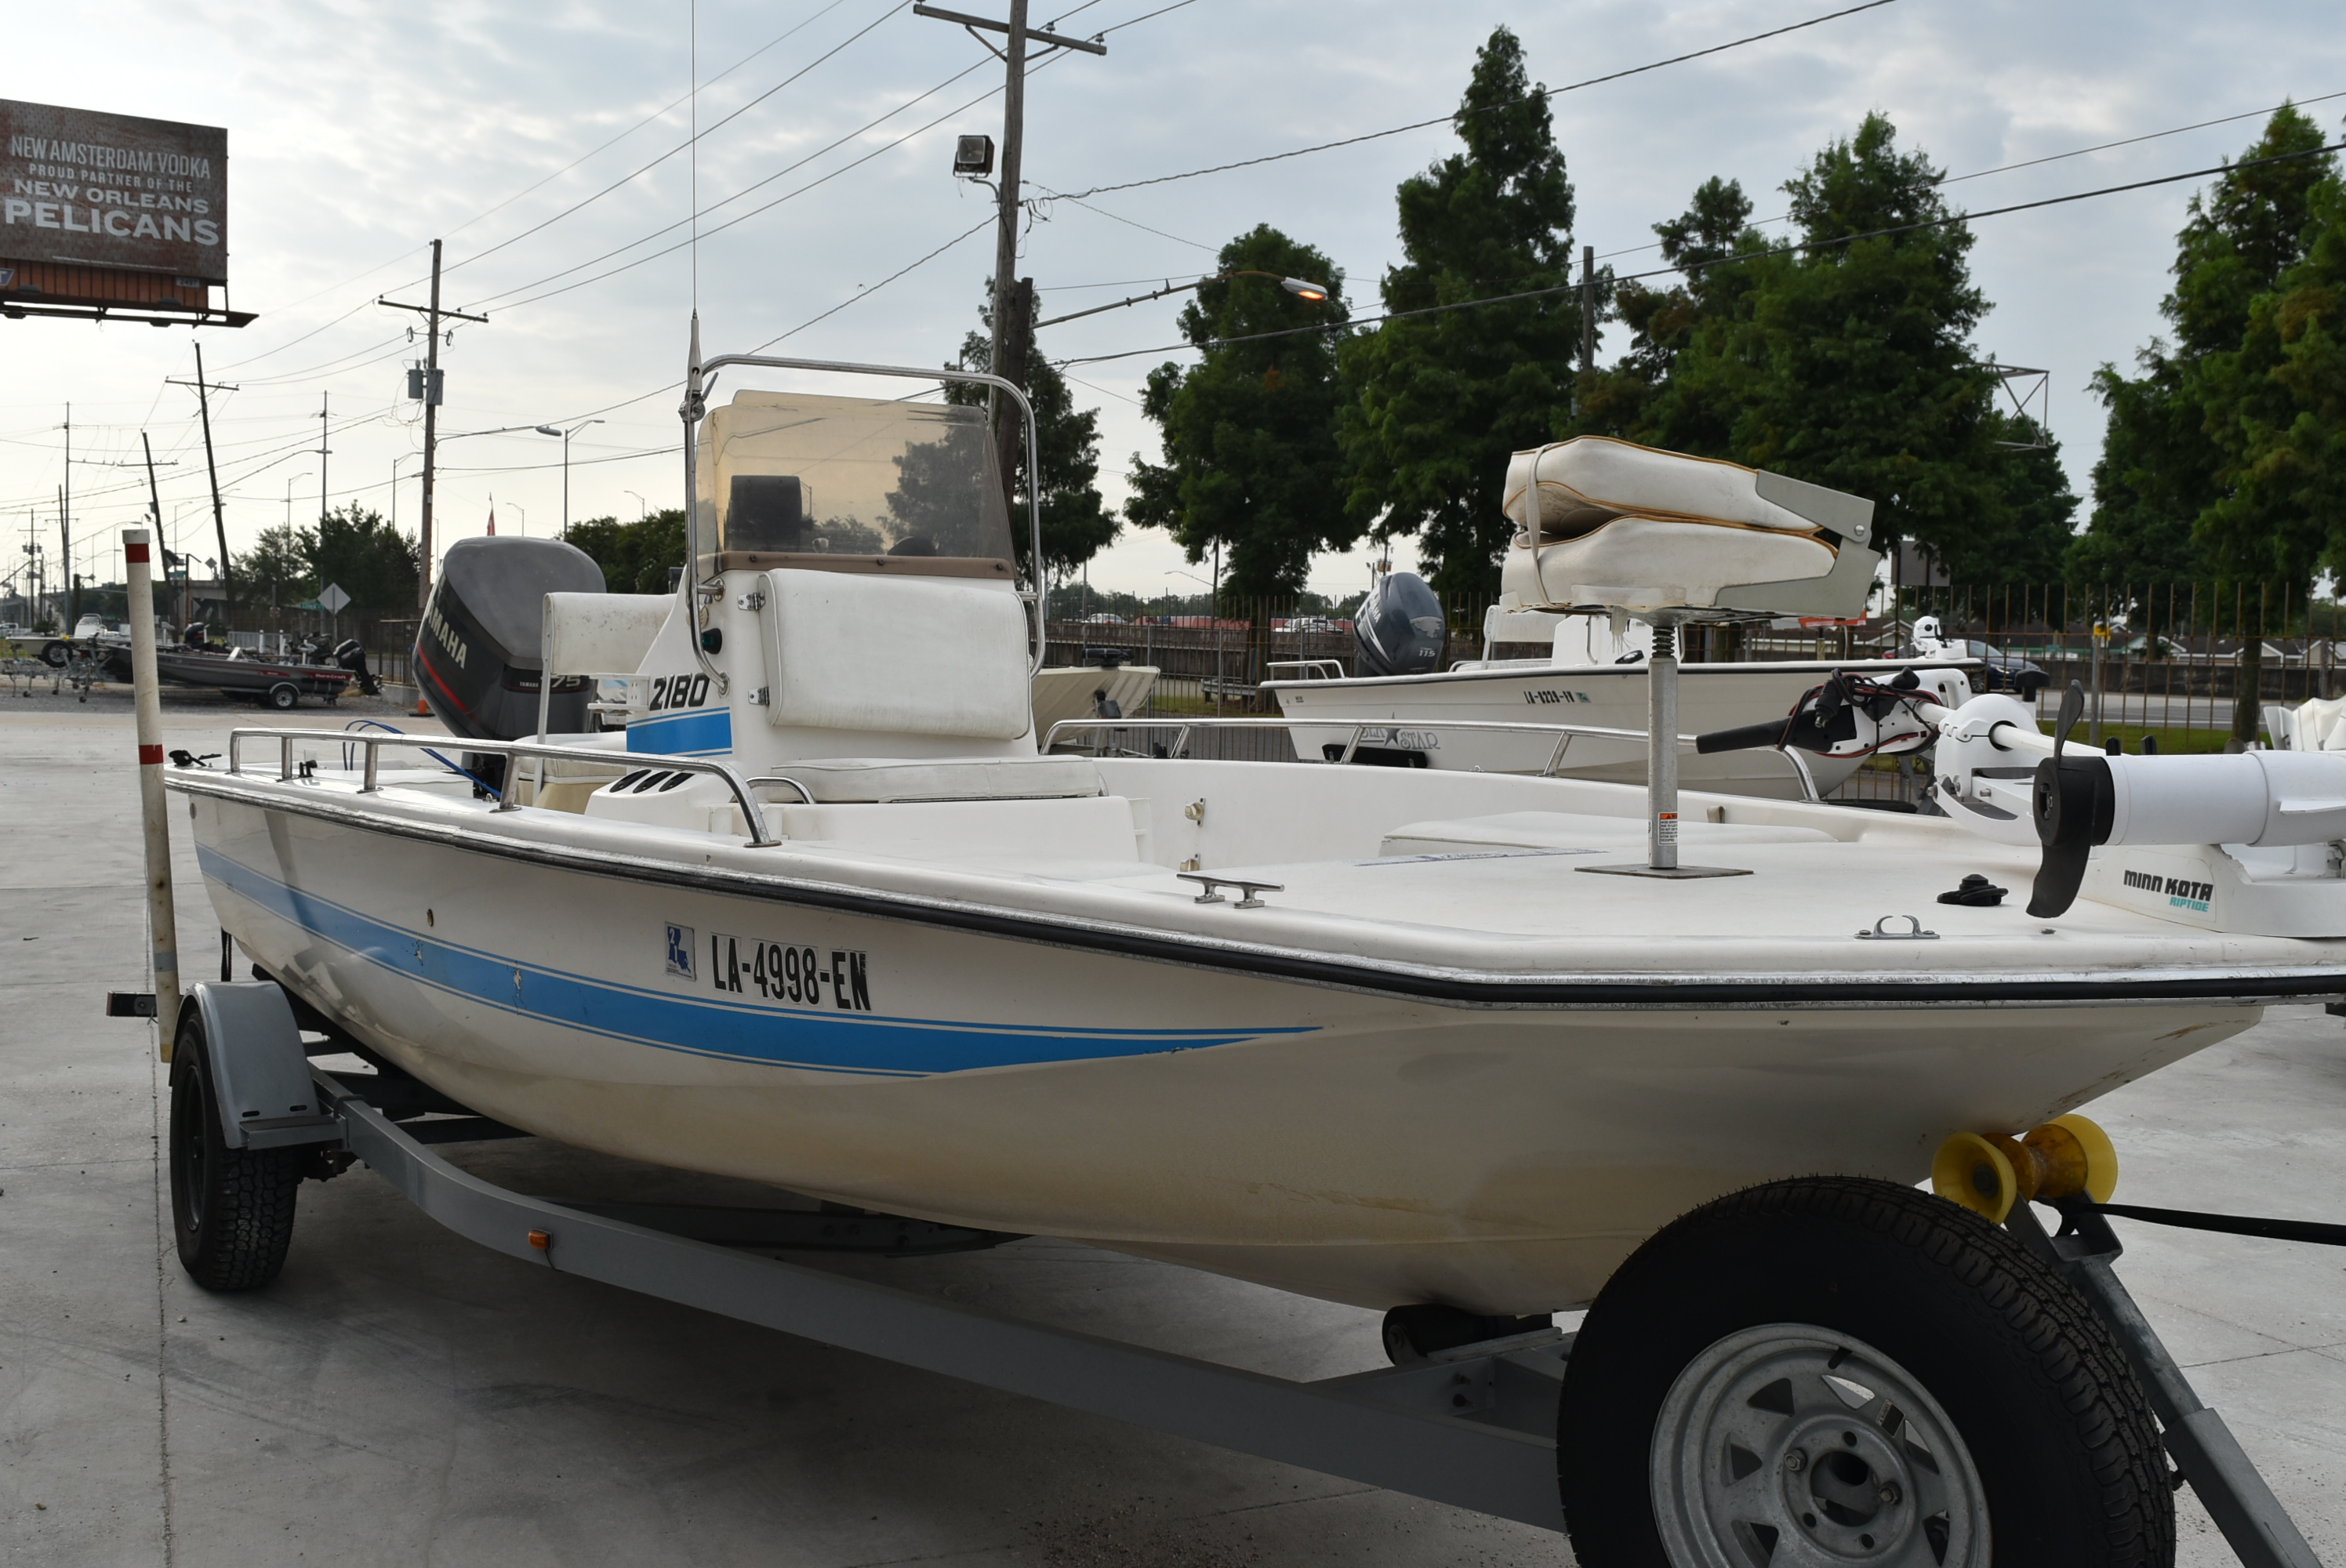 1995 Century boat for sale, model of the boat is 2180 & Image # 8 of 8